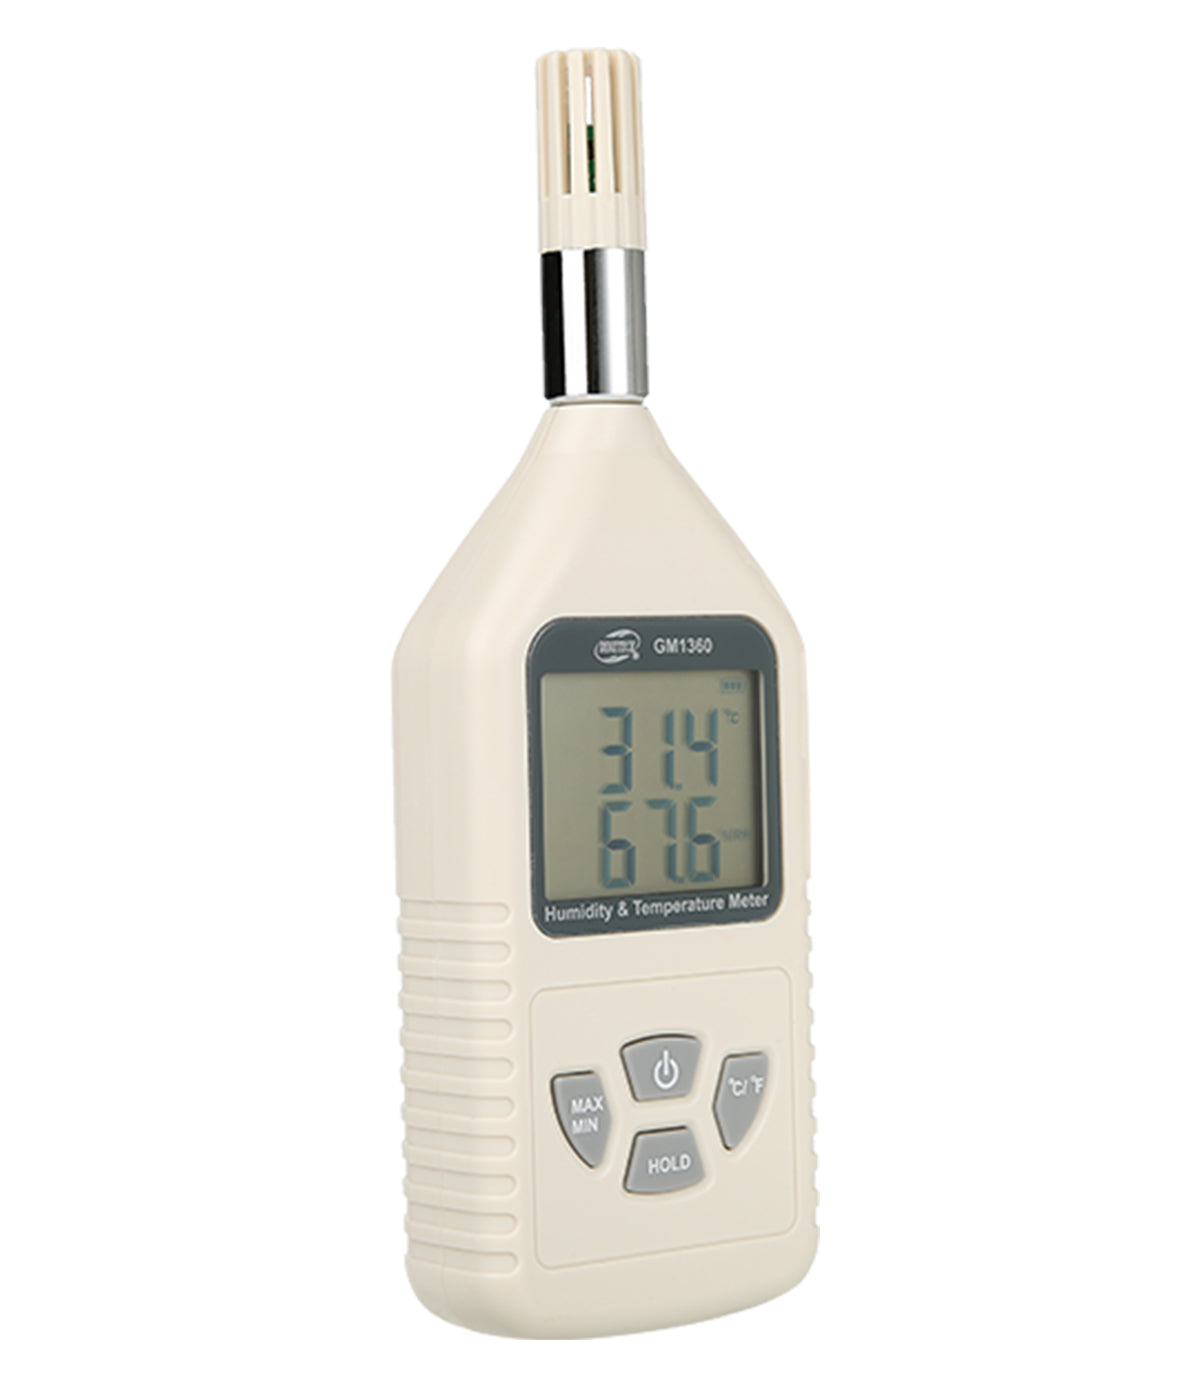 Benetech GM1360 Digital LCD Humidity Temperature Meter Thermo-hygrometer Moisture Tester Thermometer with Max/Min Mode